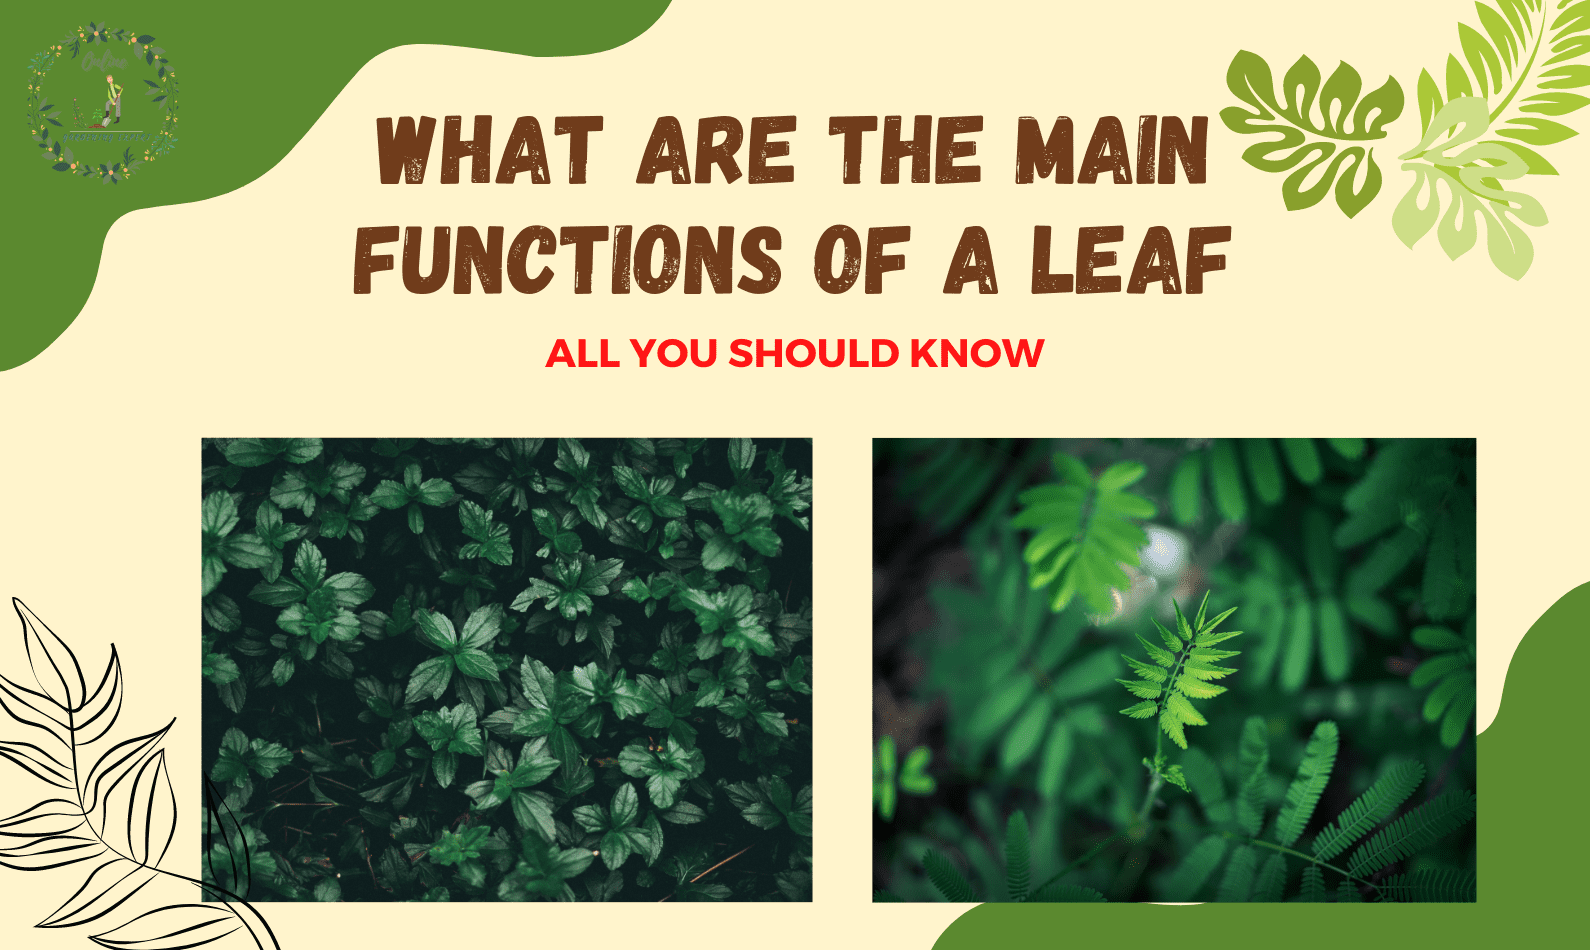 What Are The Main Functions Of A Leaf?